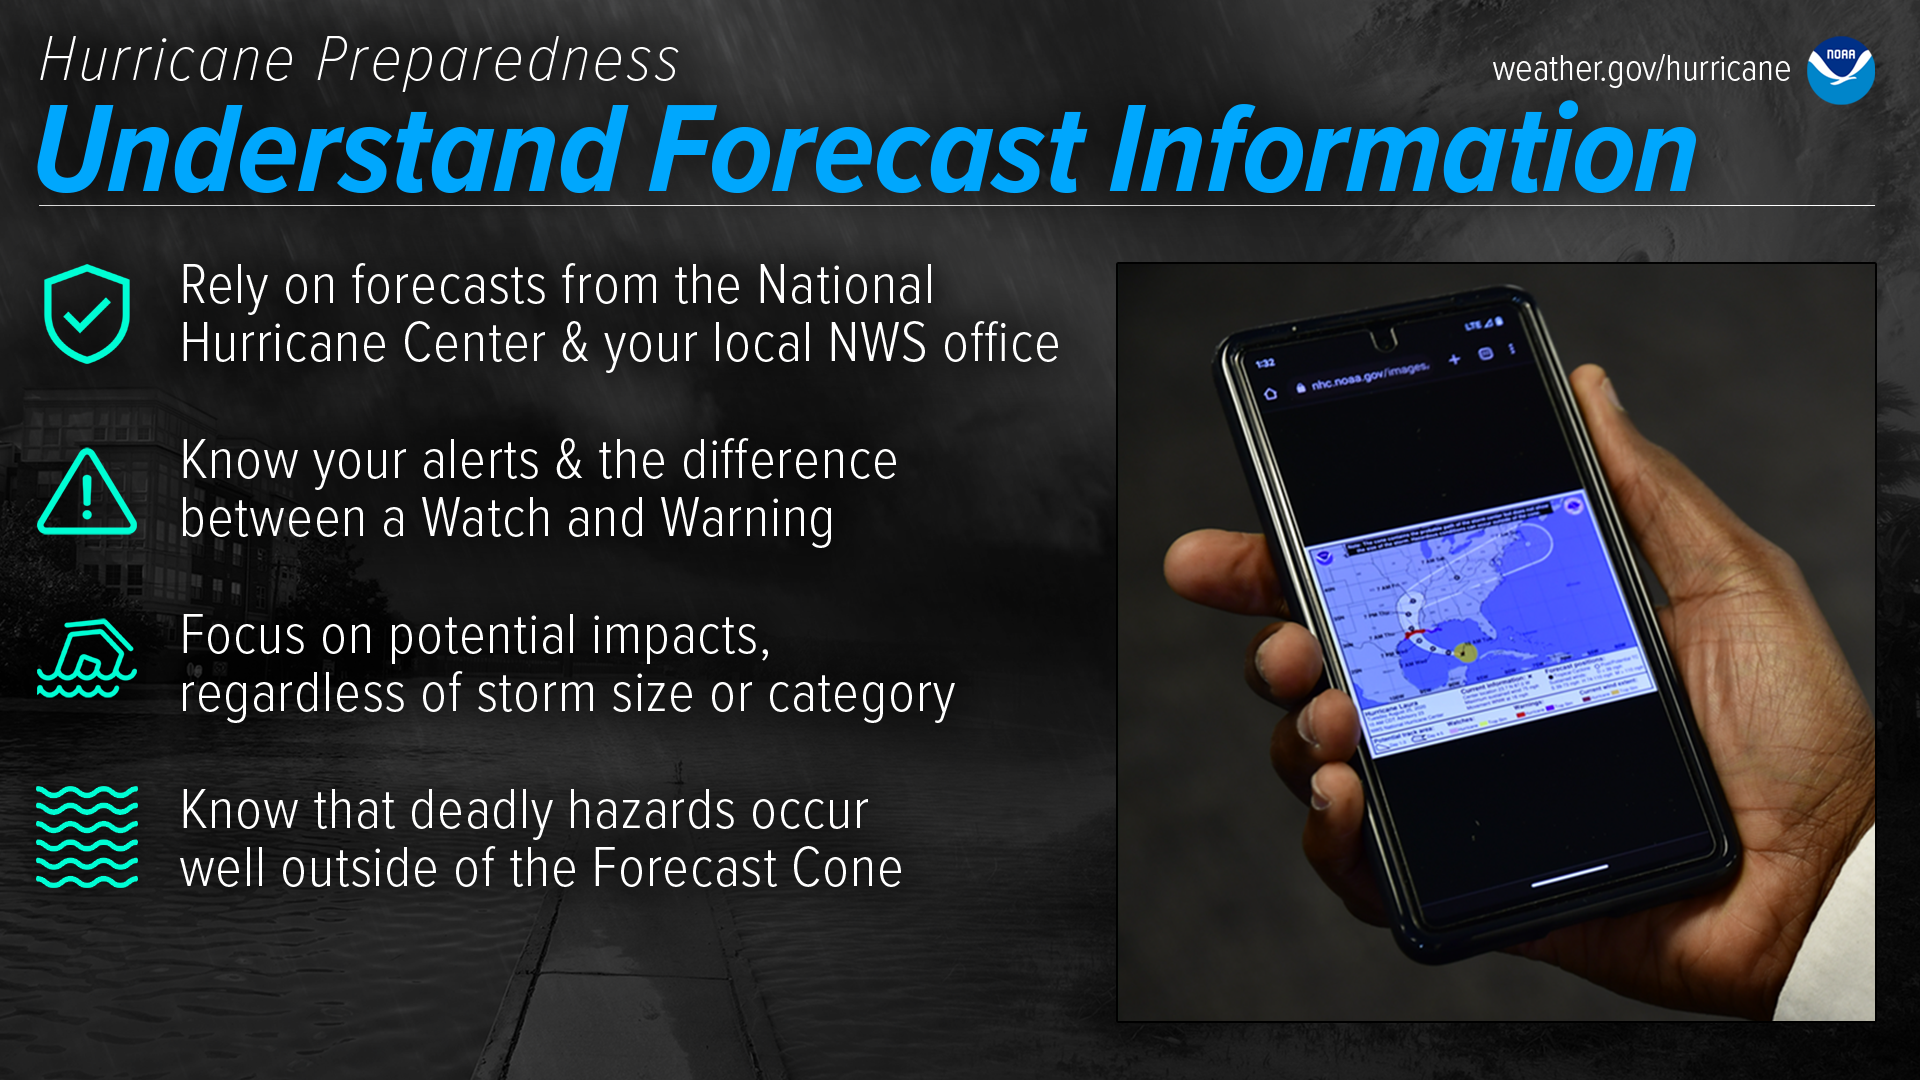 Hurricane Preparedness - Understand Forecast Information. Rely on forecasts from the National Hurricane Center and your local NWS office. Know your alerts & the difference between a Watch and Warning. Focus on potential impacts, regardless of storm size or category. Know that deadly hazards occur well outside of the Forecast Cone.